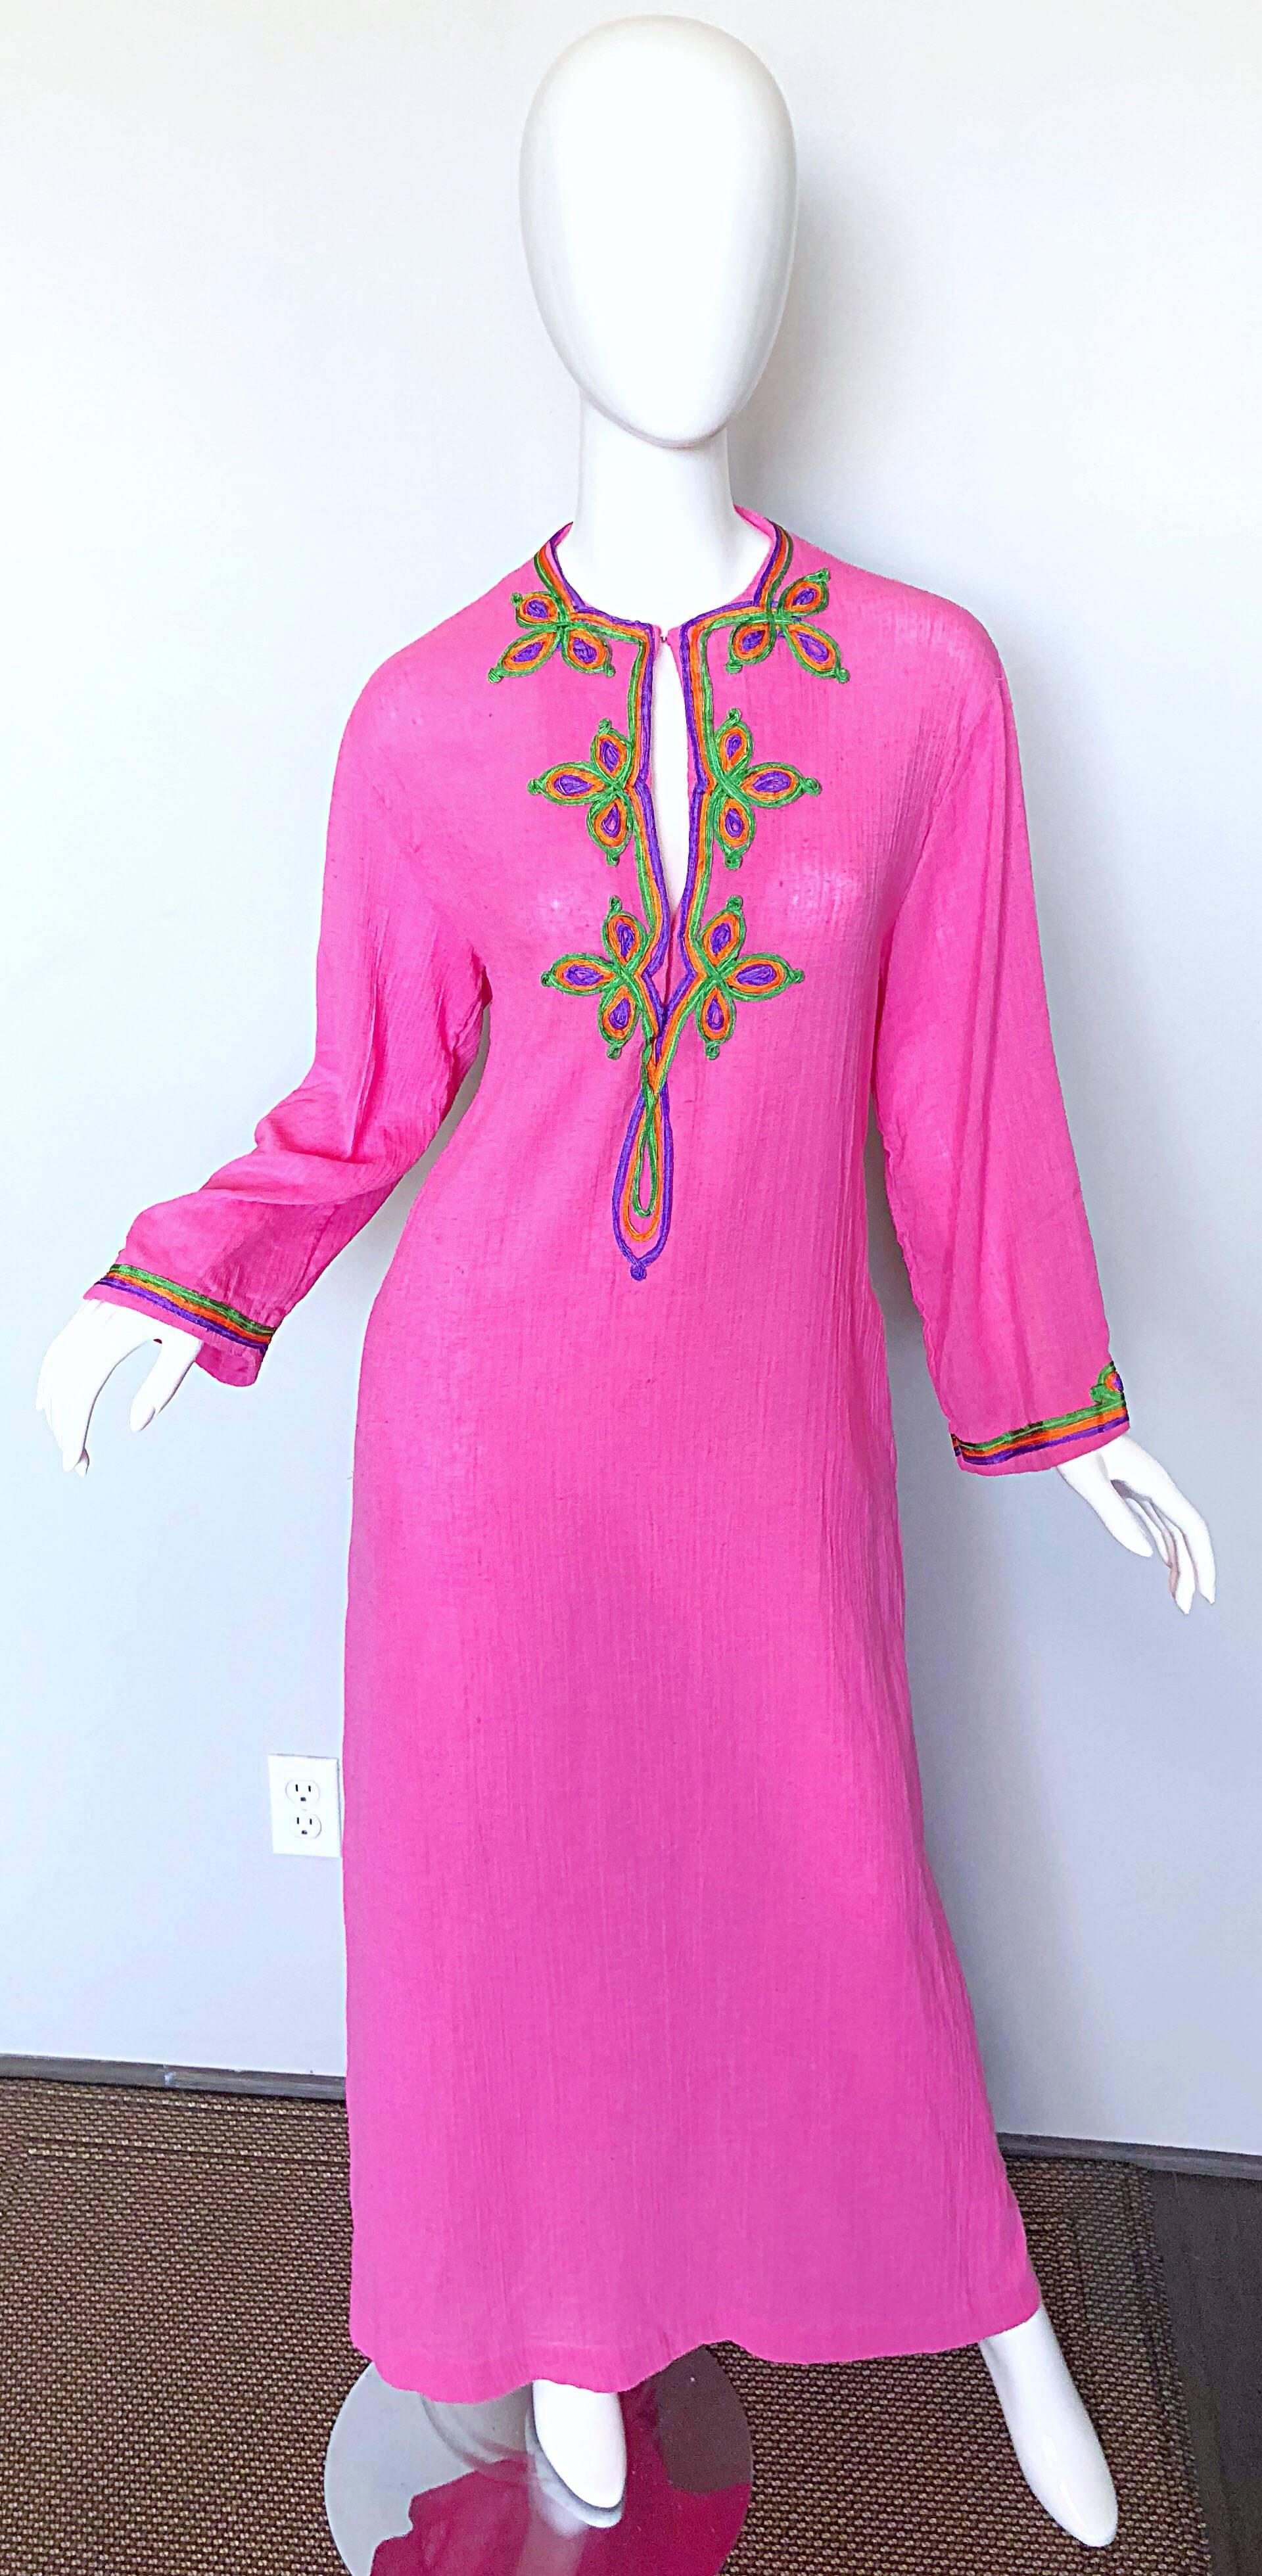 Sensational late 1960s CHRISTIAN DIOE bubblegum pink embroidered lightweight cotton kaftan / maxi dress! Fabulous Moroccan inspiration, with colorful hand embroidery of purple, green and orange down the bodice, around the neck and sleeve cuffs.